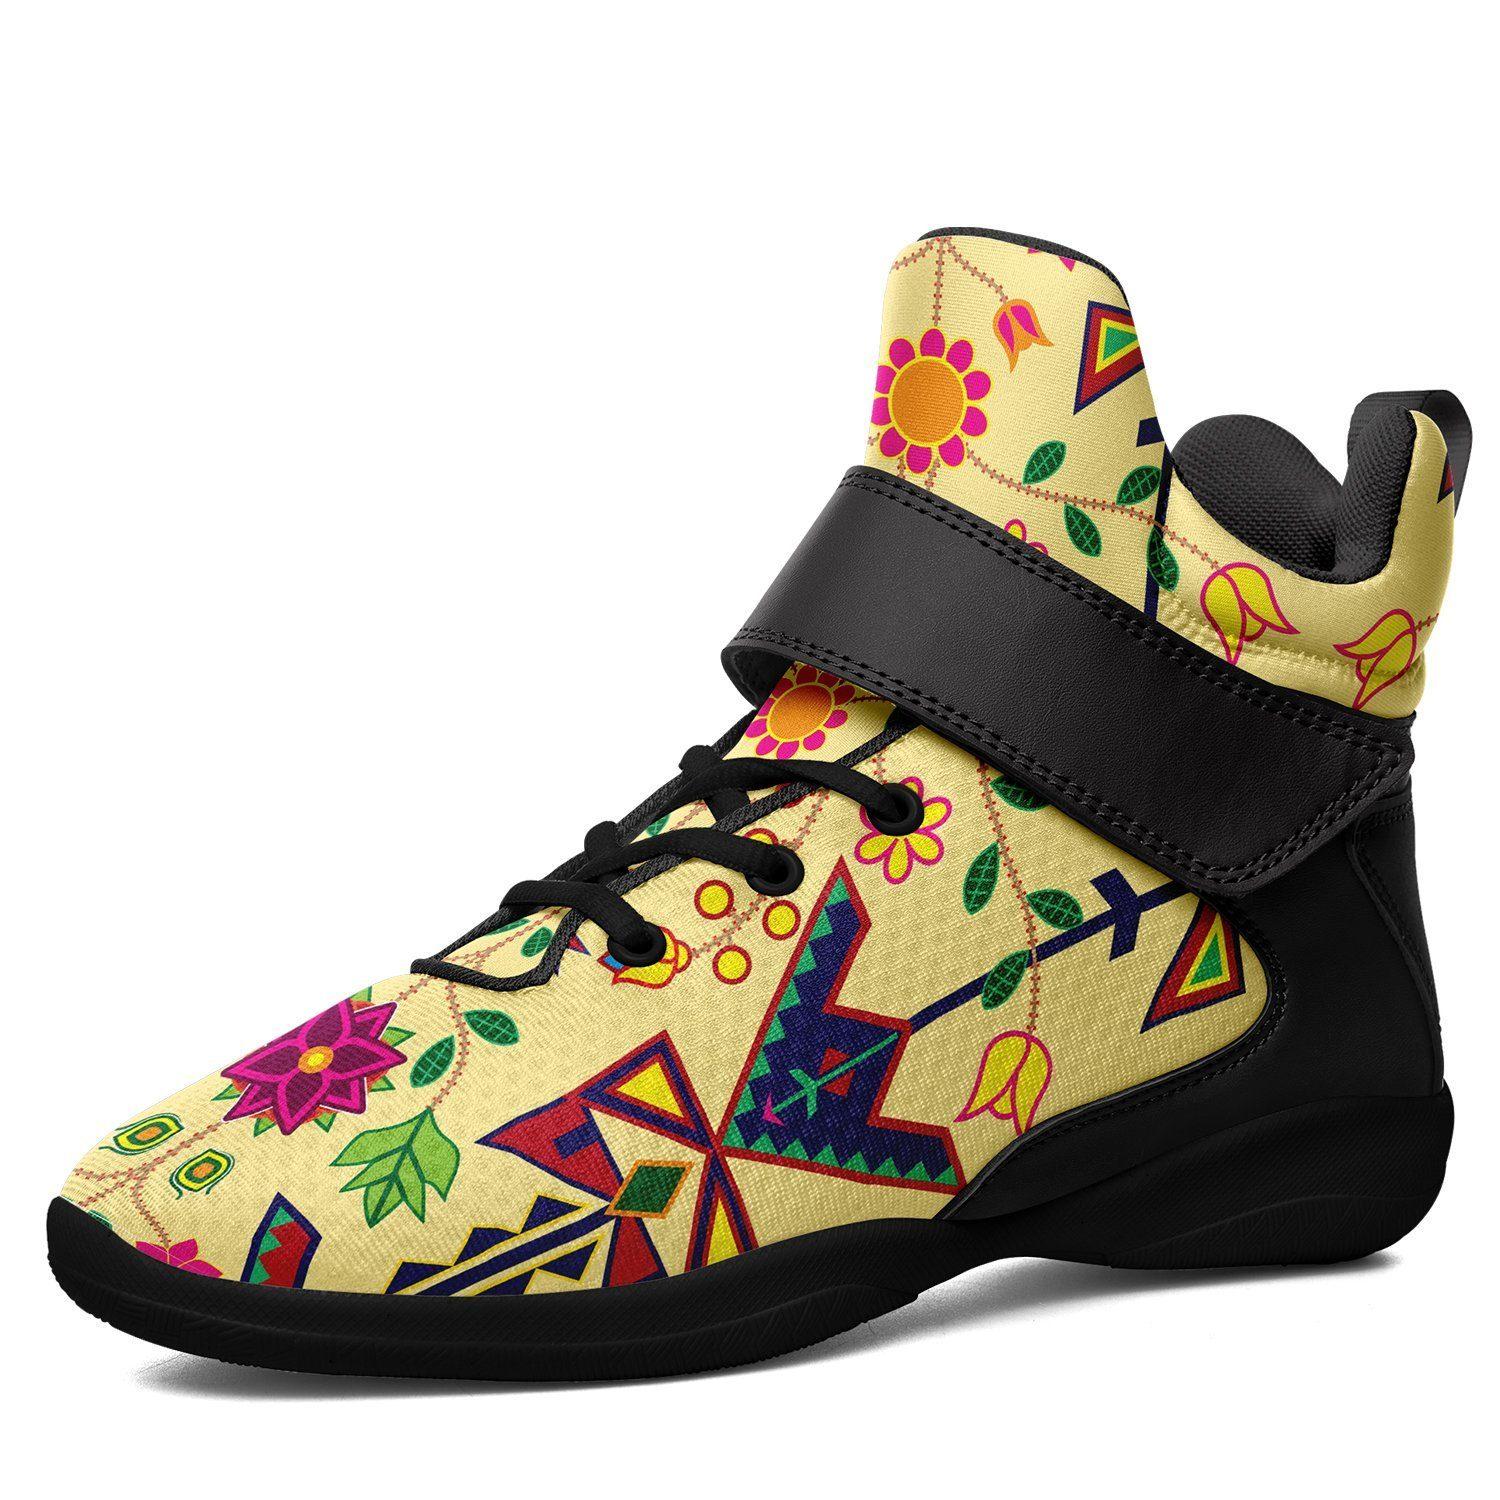 Geometric Floral Spring Vanilla Ipottaa Basketball / Sport High Top Shoes - Black Sole 49 Dzine US Men 7 / EUR 40 Black Sole with Black Strap 